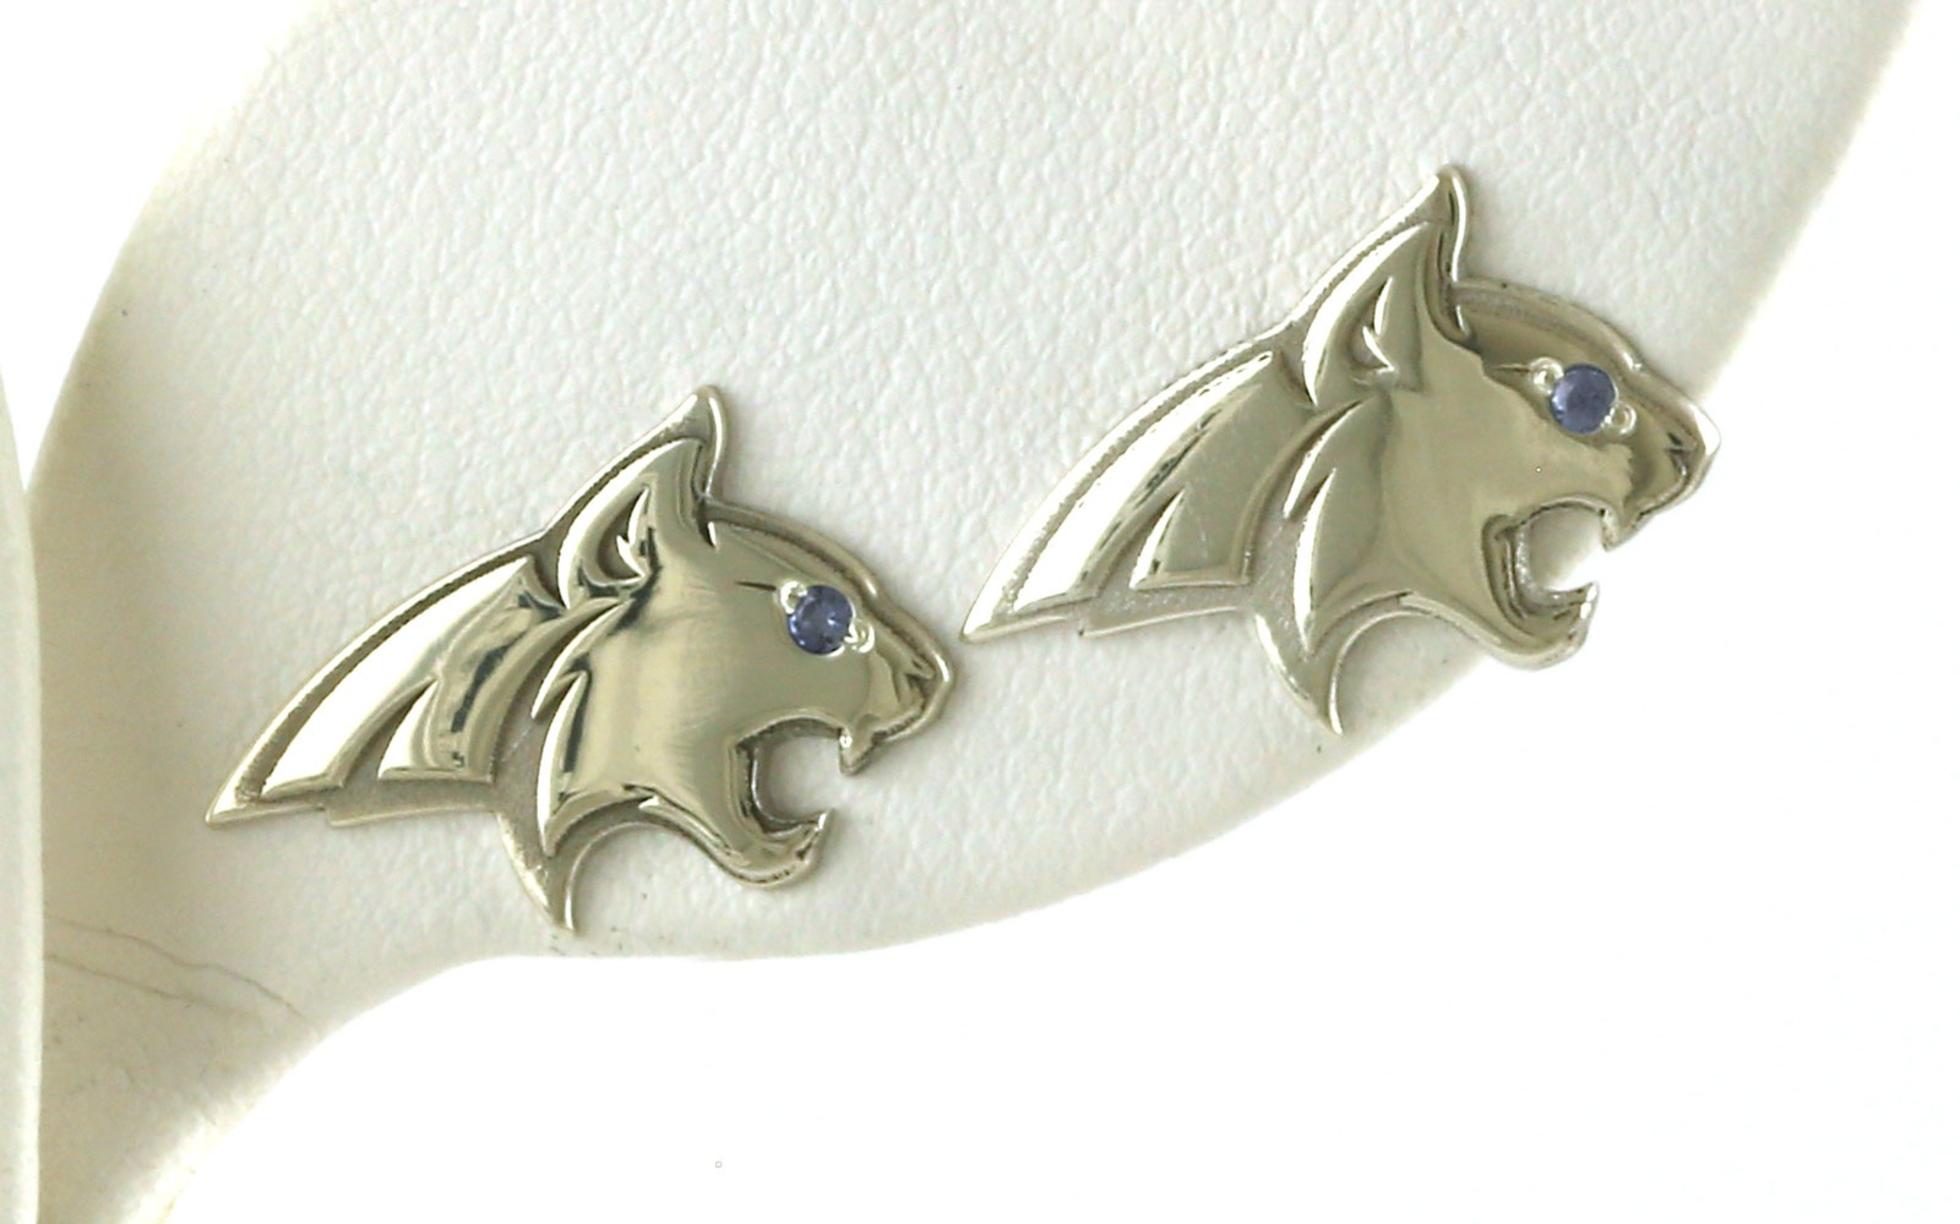 Large Official Bobcat Stud Earrings with Montana Yogo Sapphire Eye in Sterling Silver (0.03cts TWT)